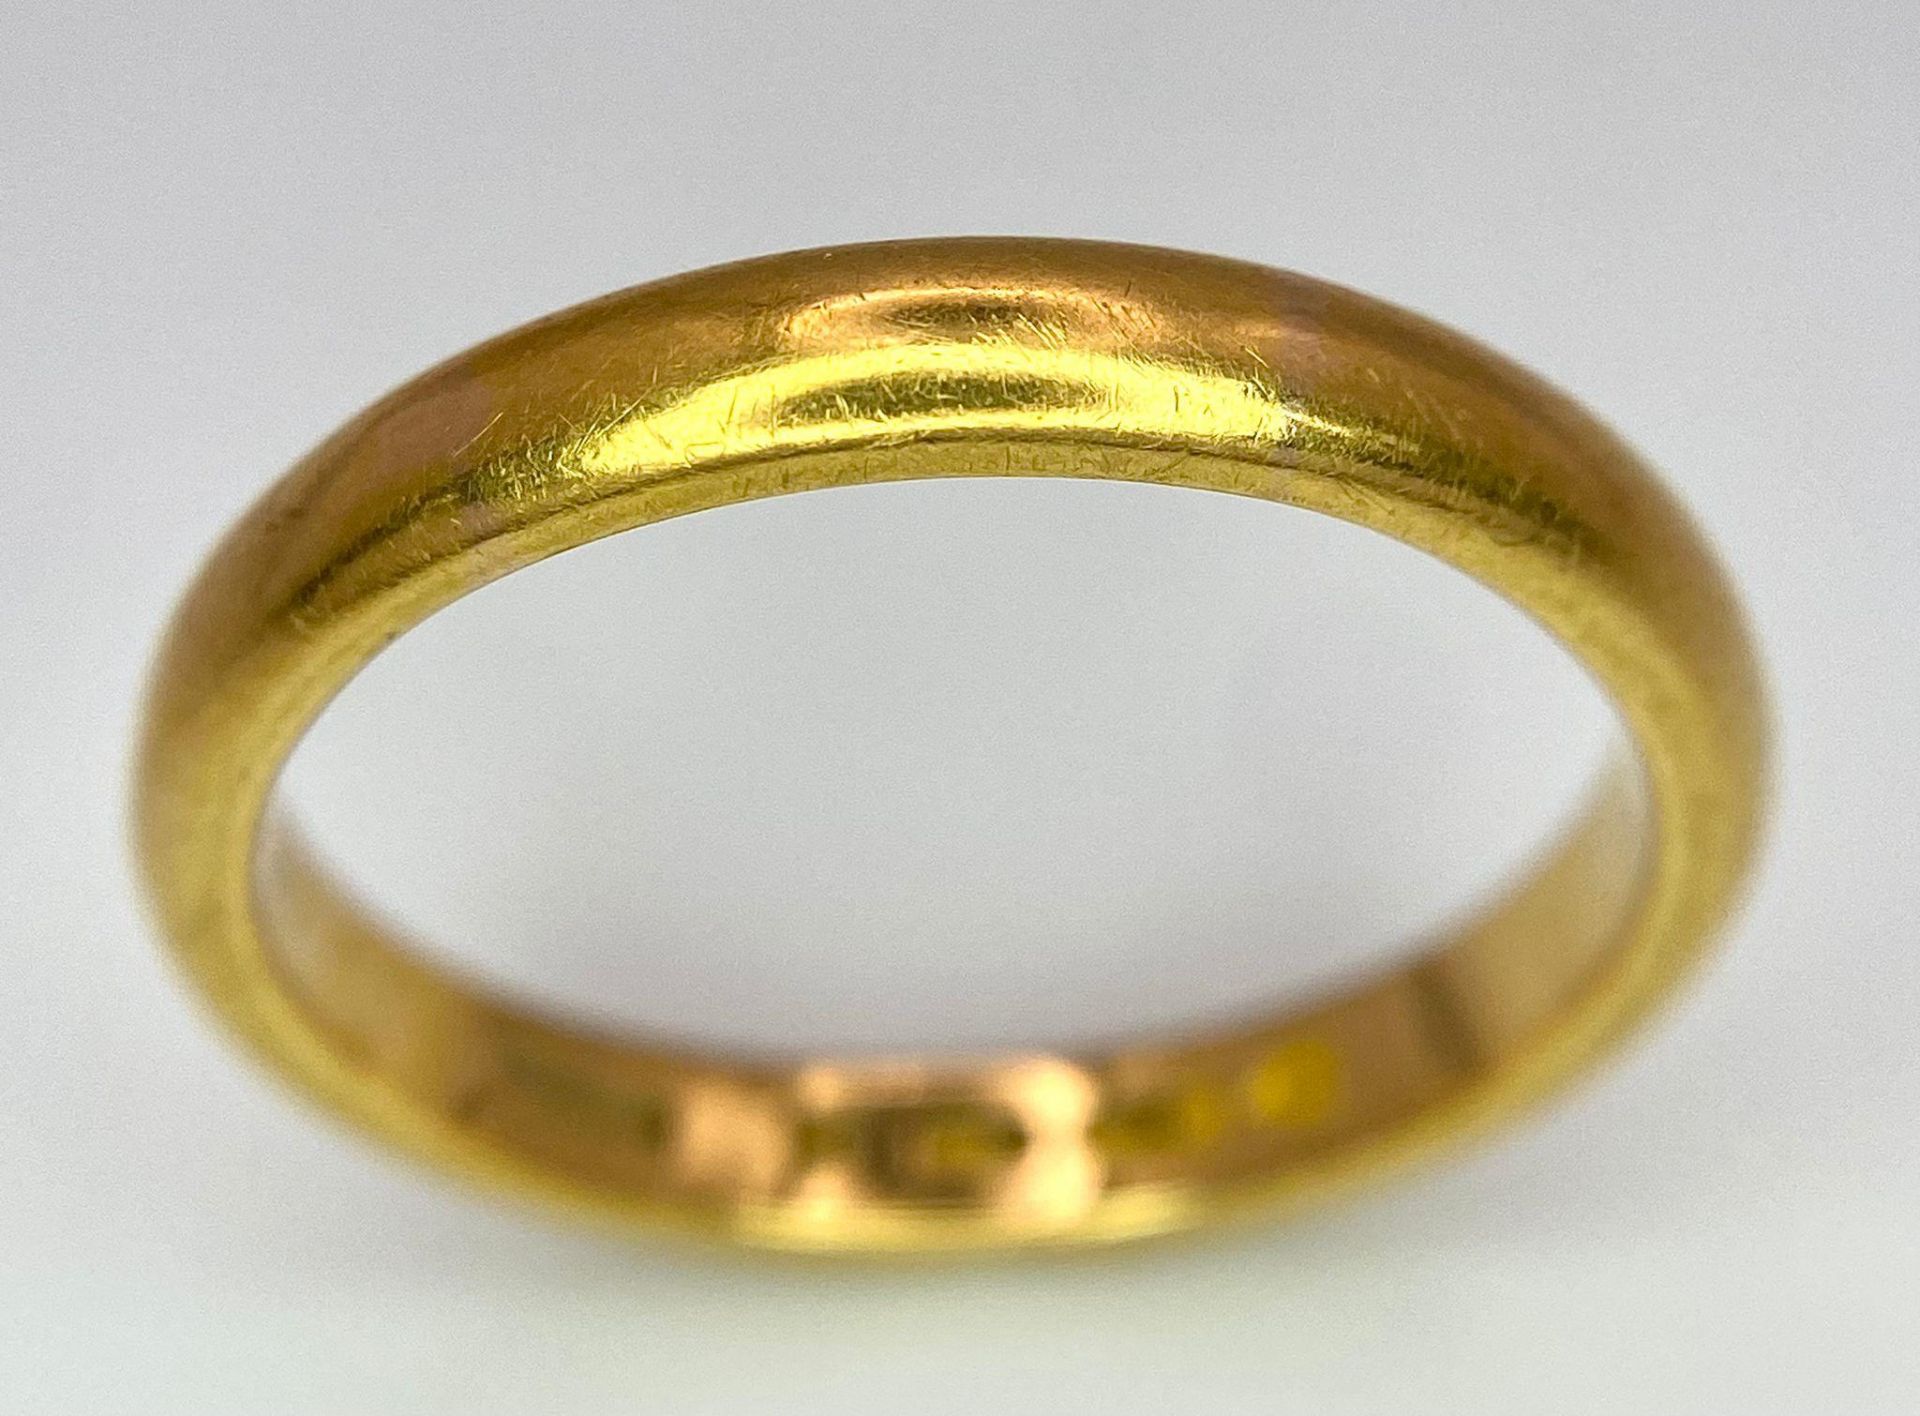 A 22 K yellow gold wedding band ring, fully hallmarked, size: U, weight: 6.4 g.